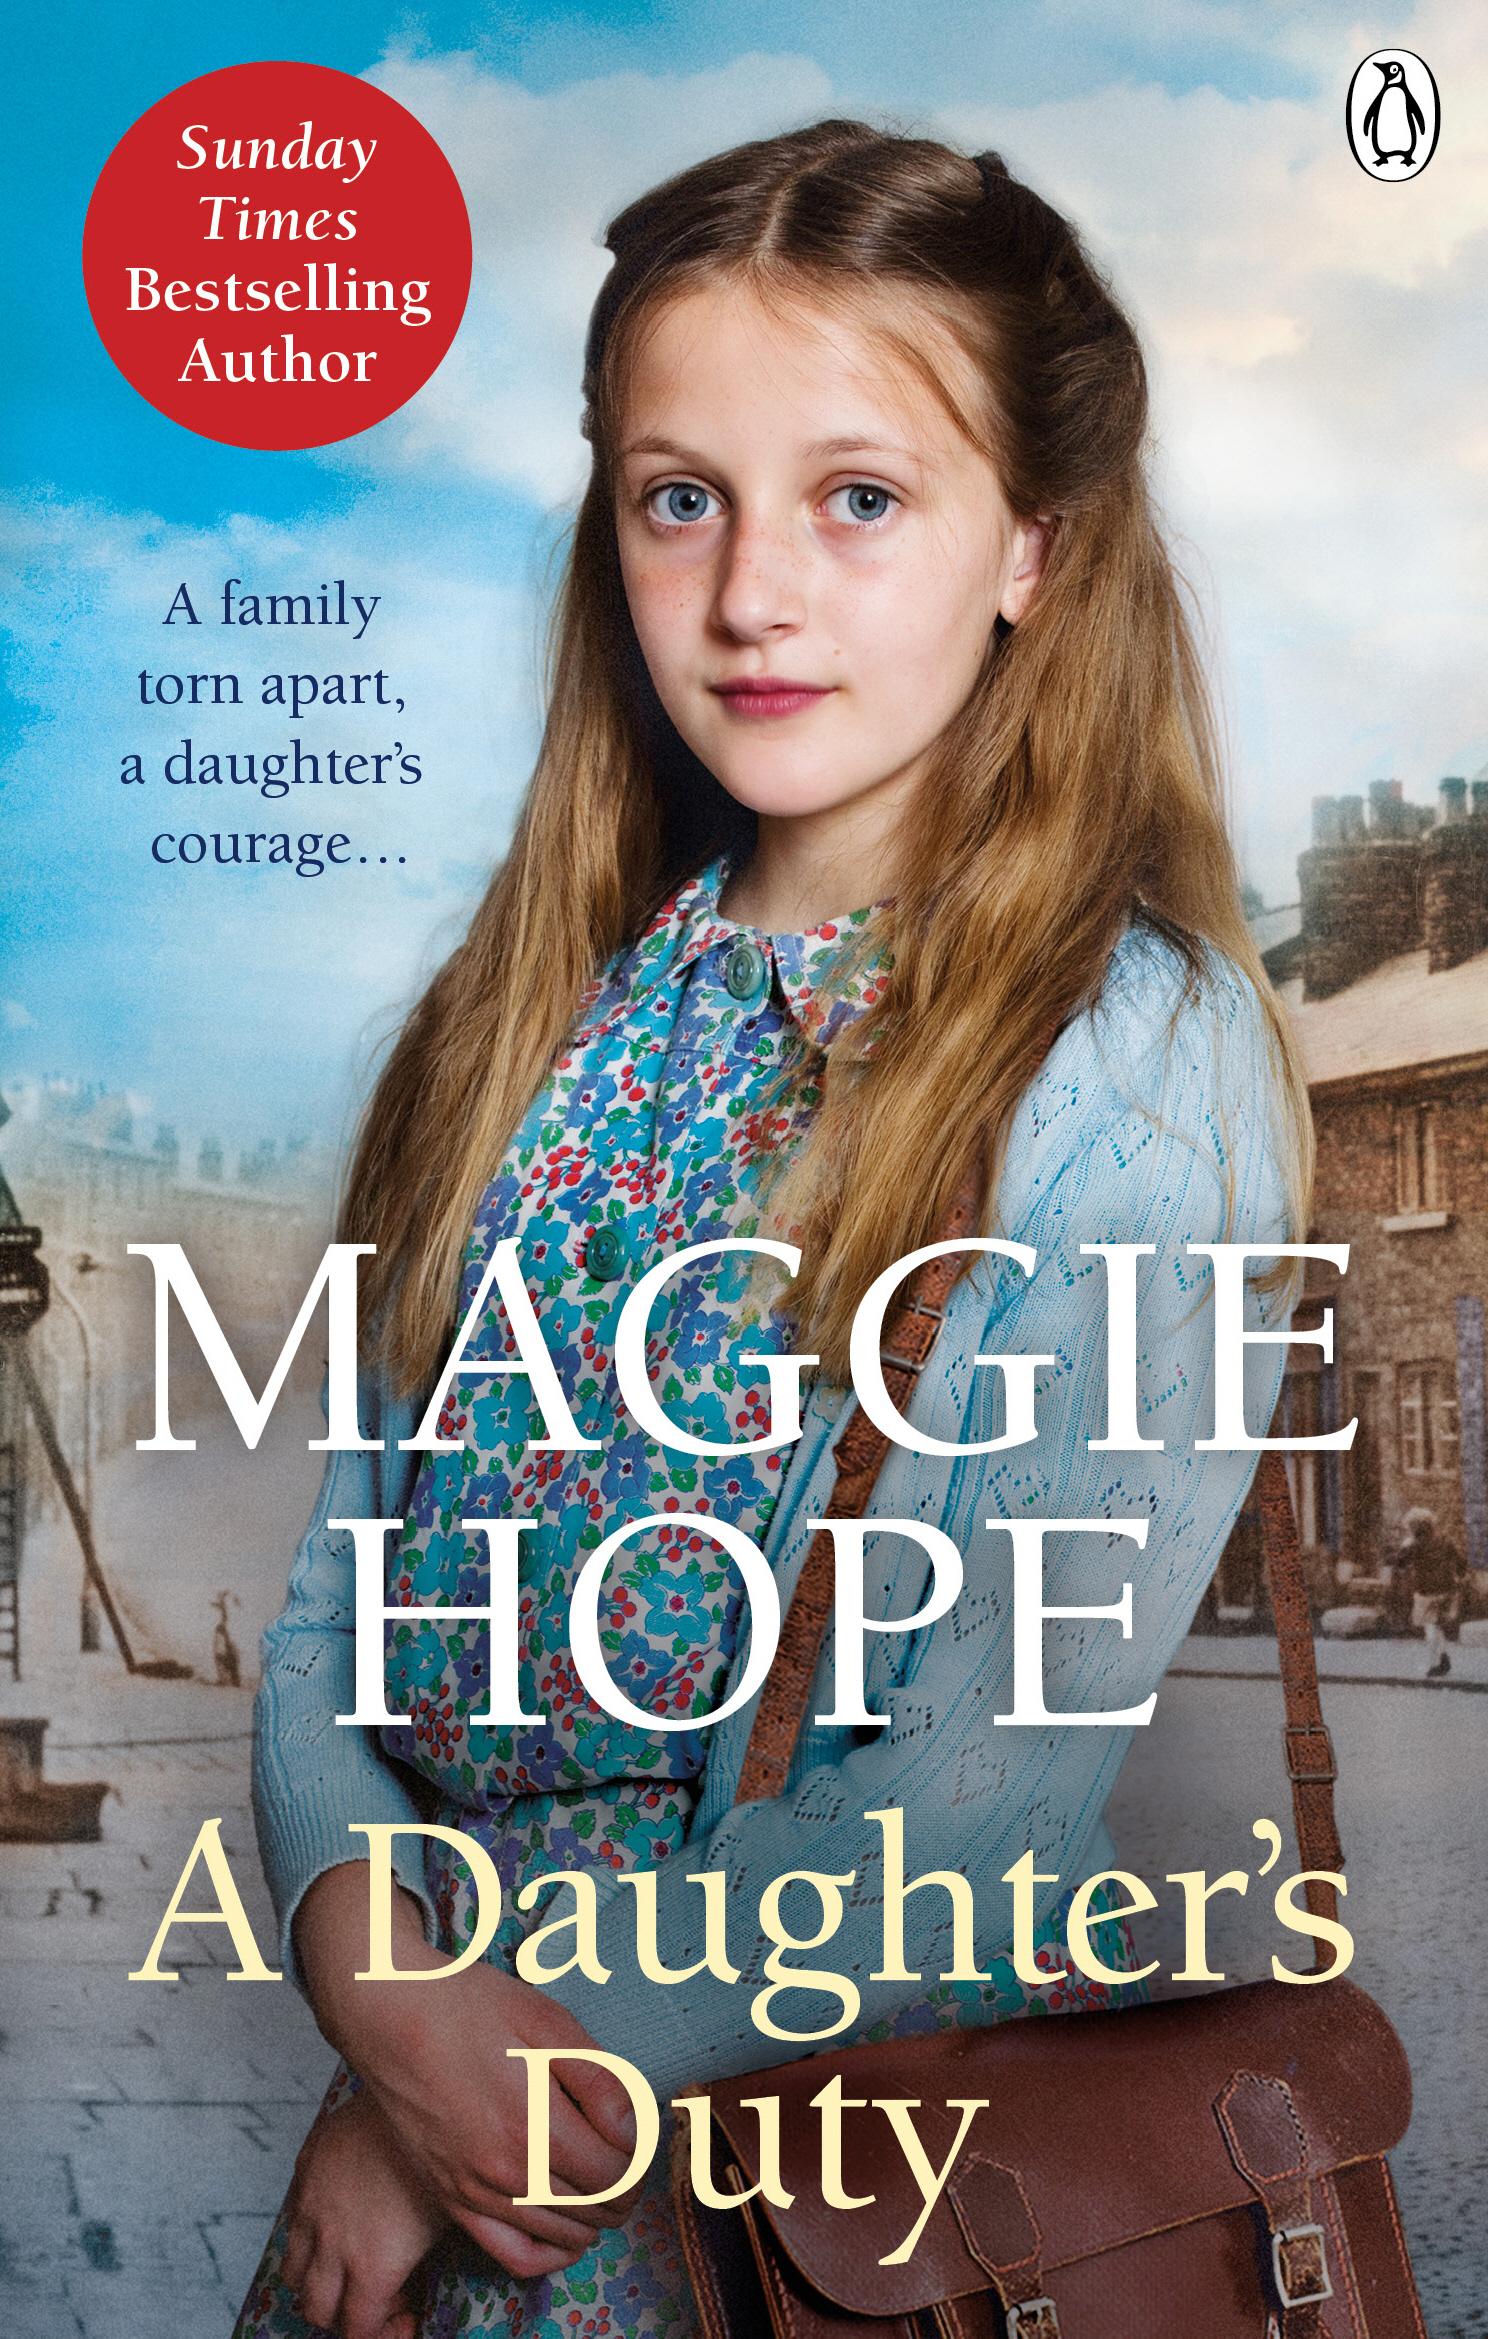 Daughter's Duty - Maggie Hope